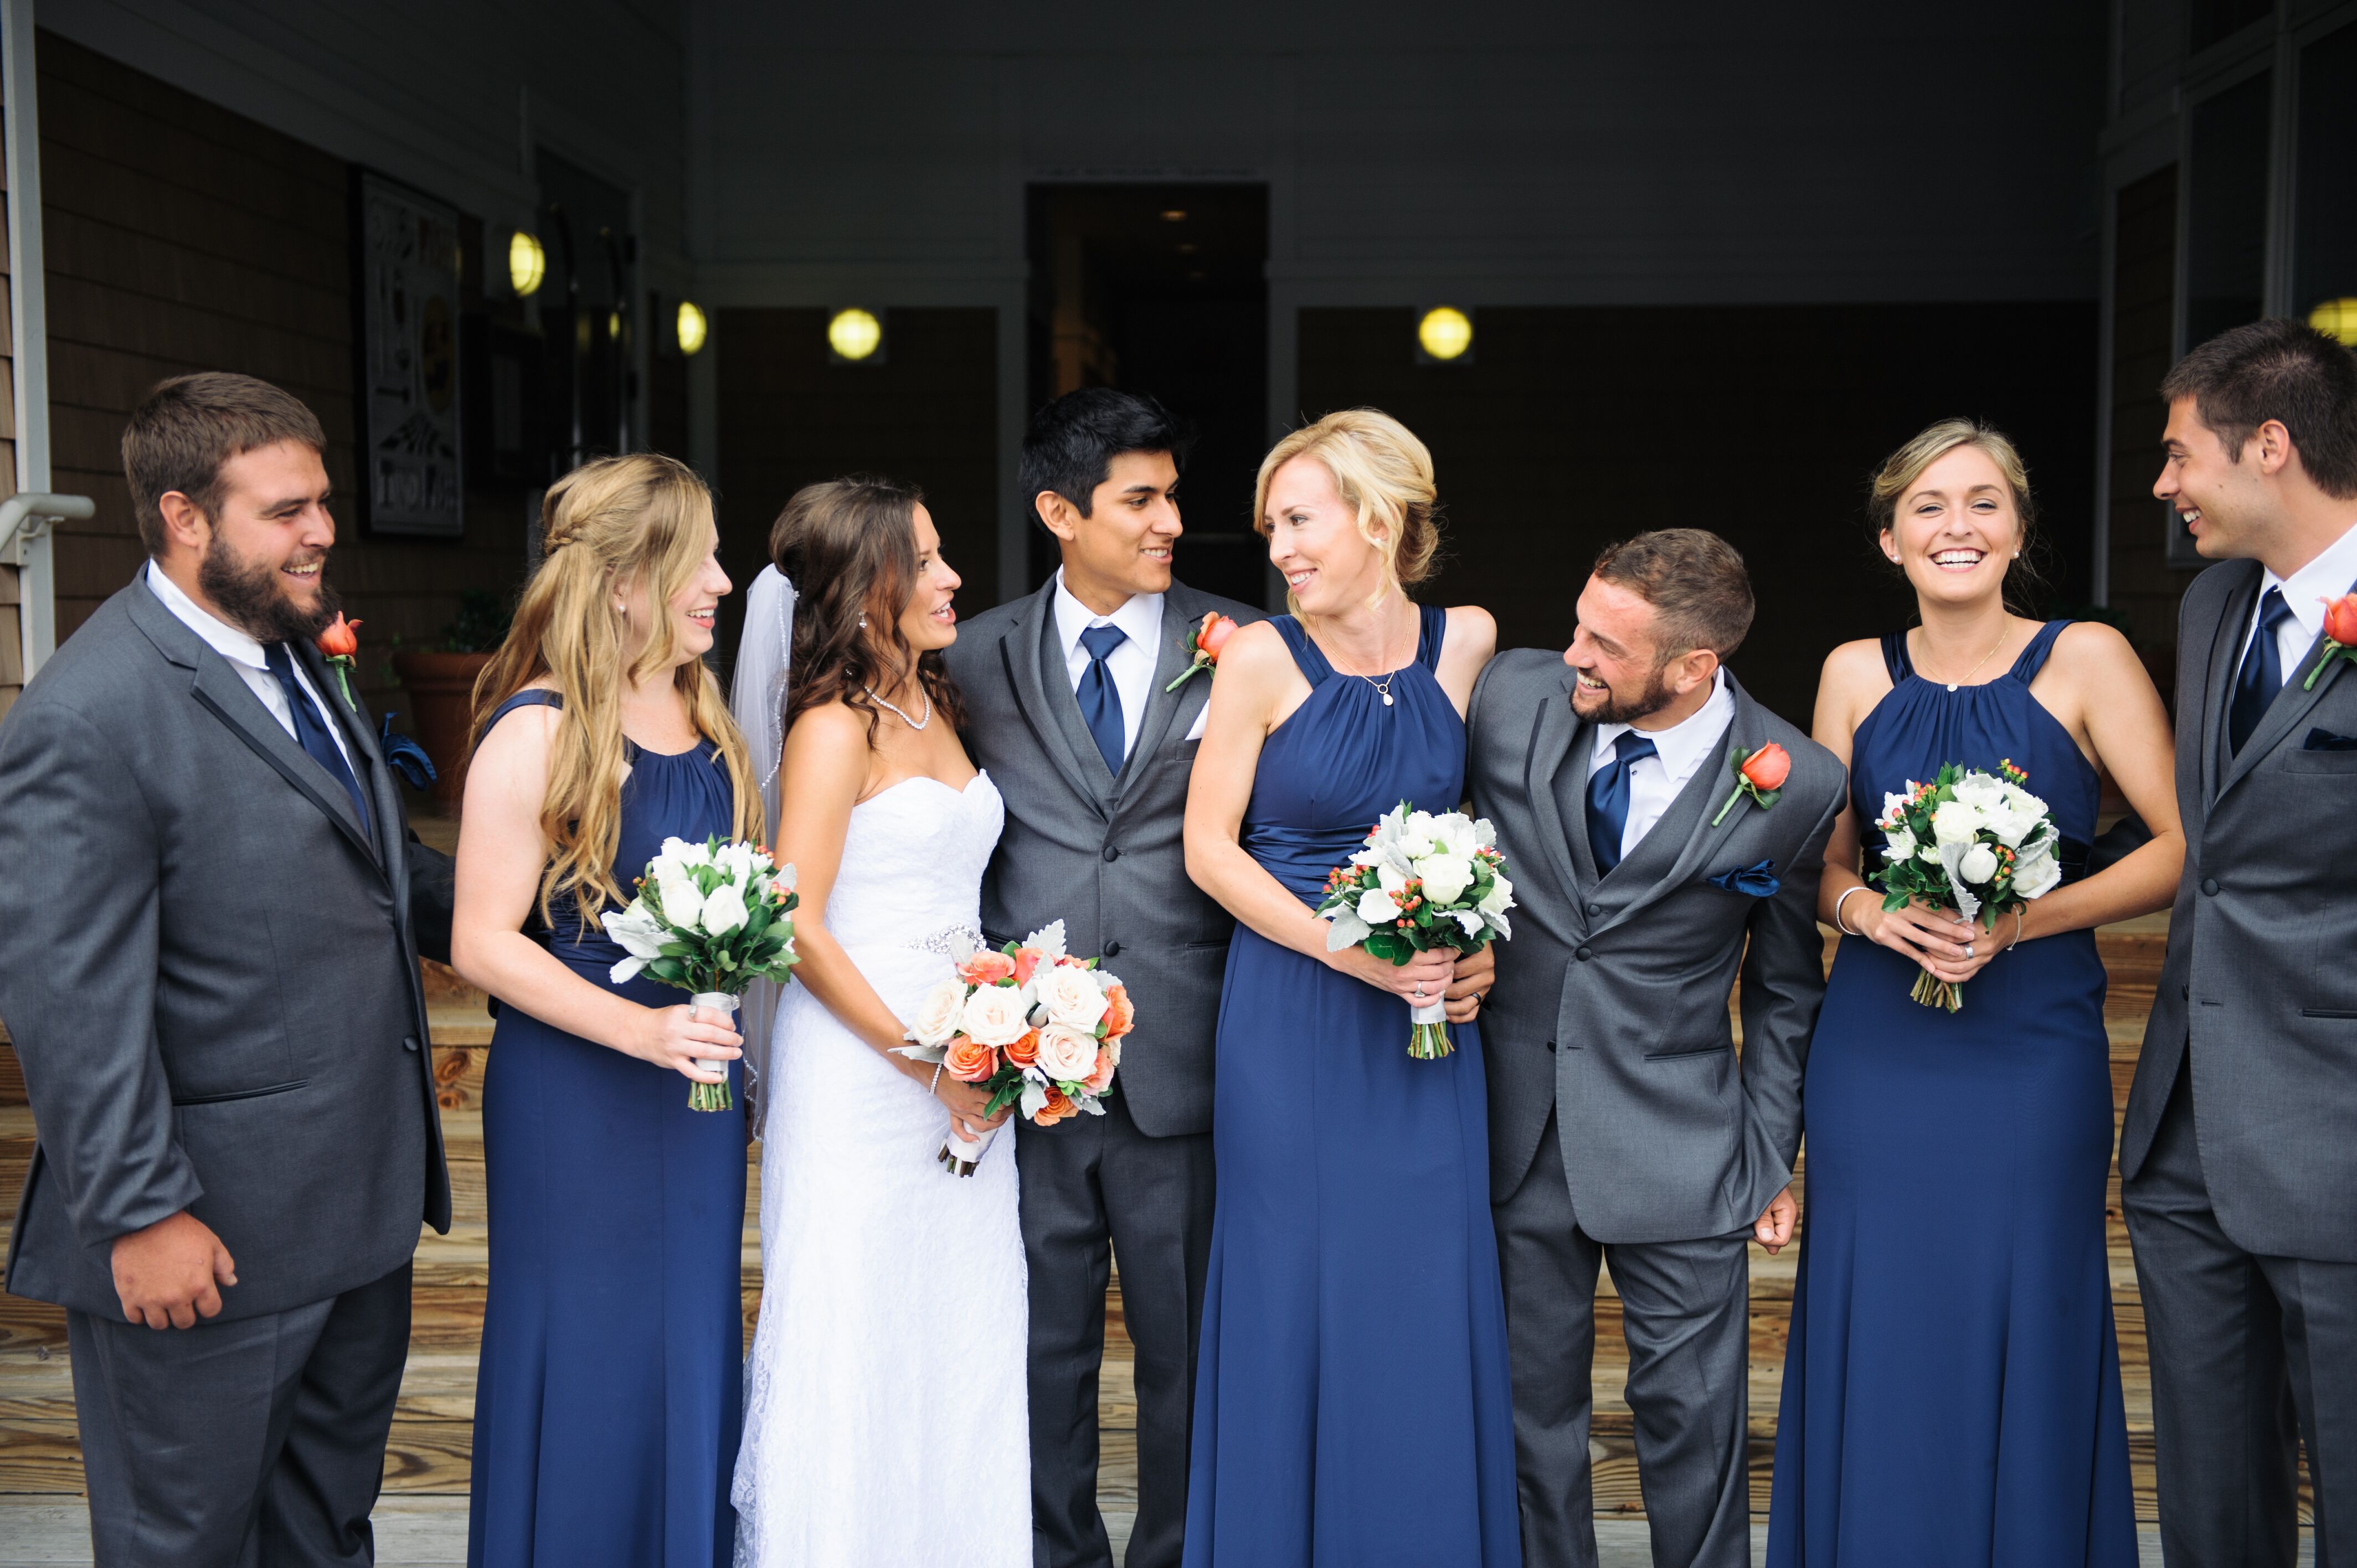 Wedding Party in Navy and Charcoal Gray